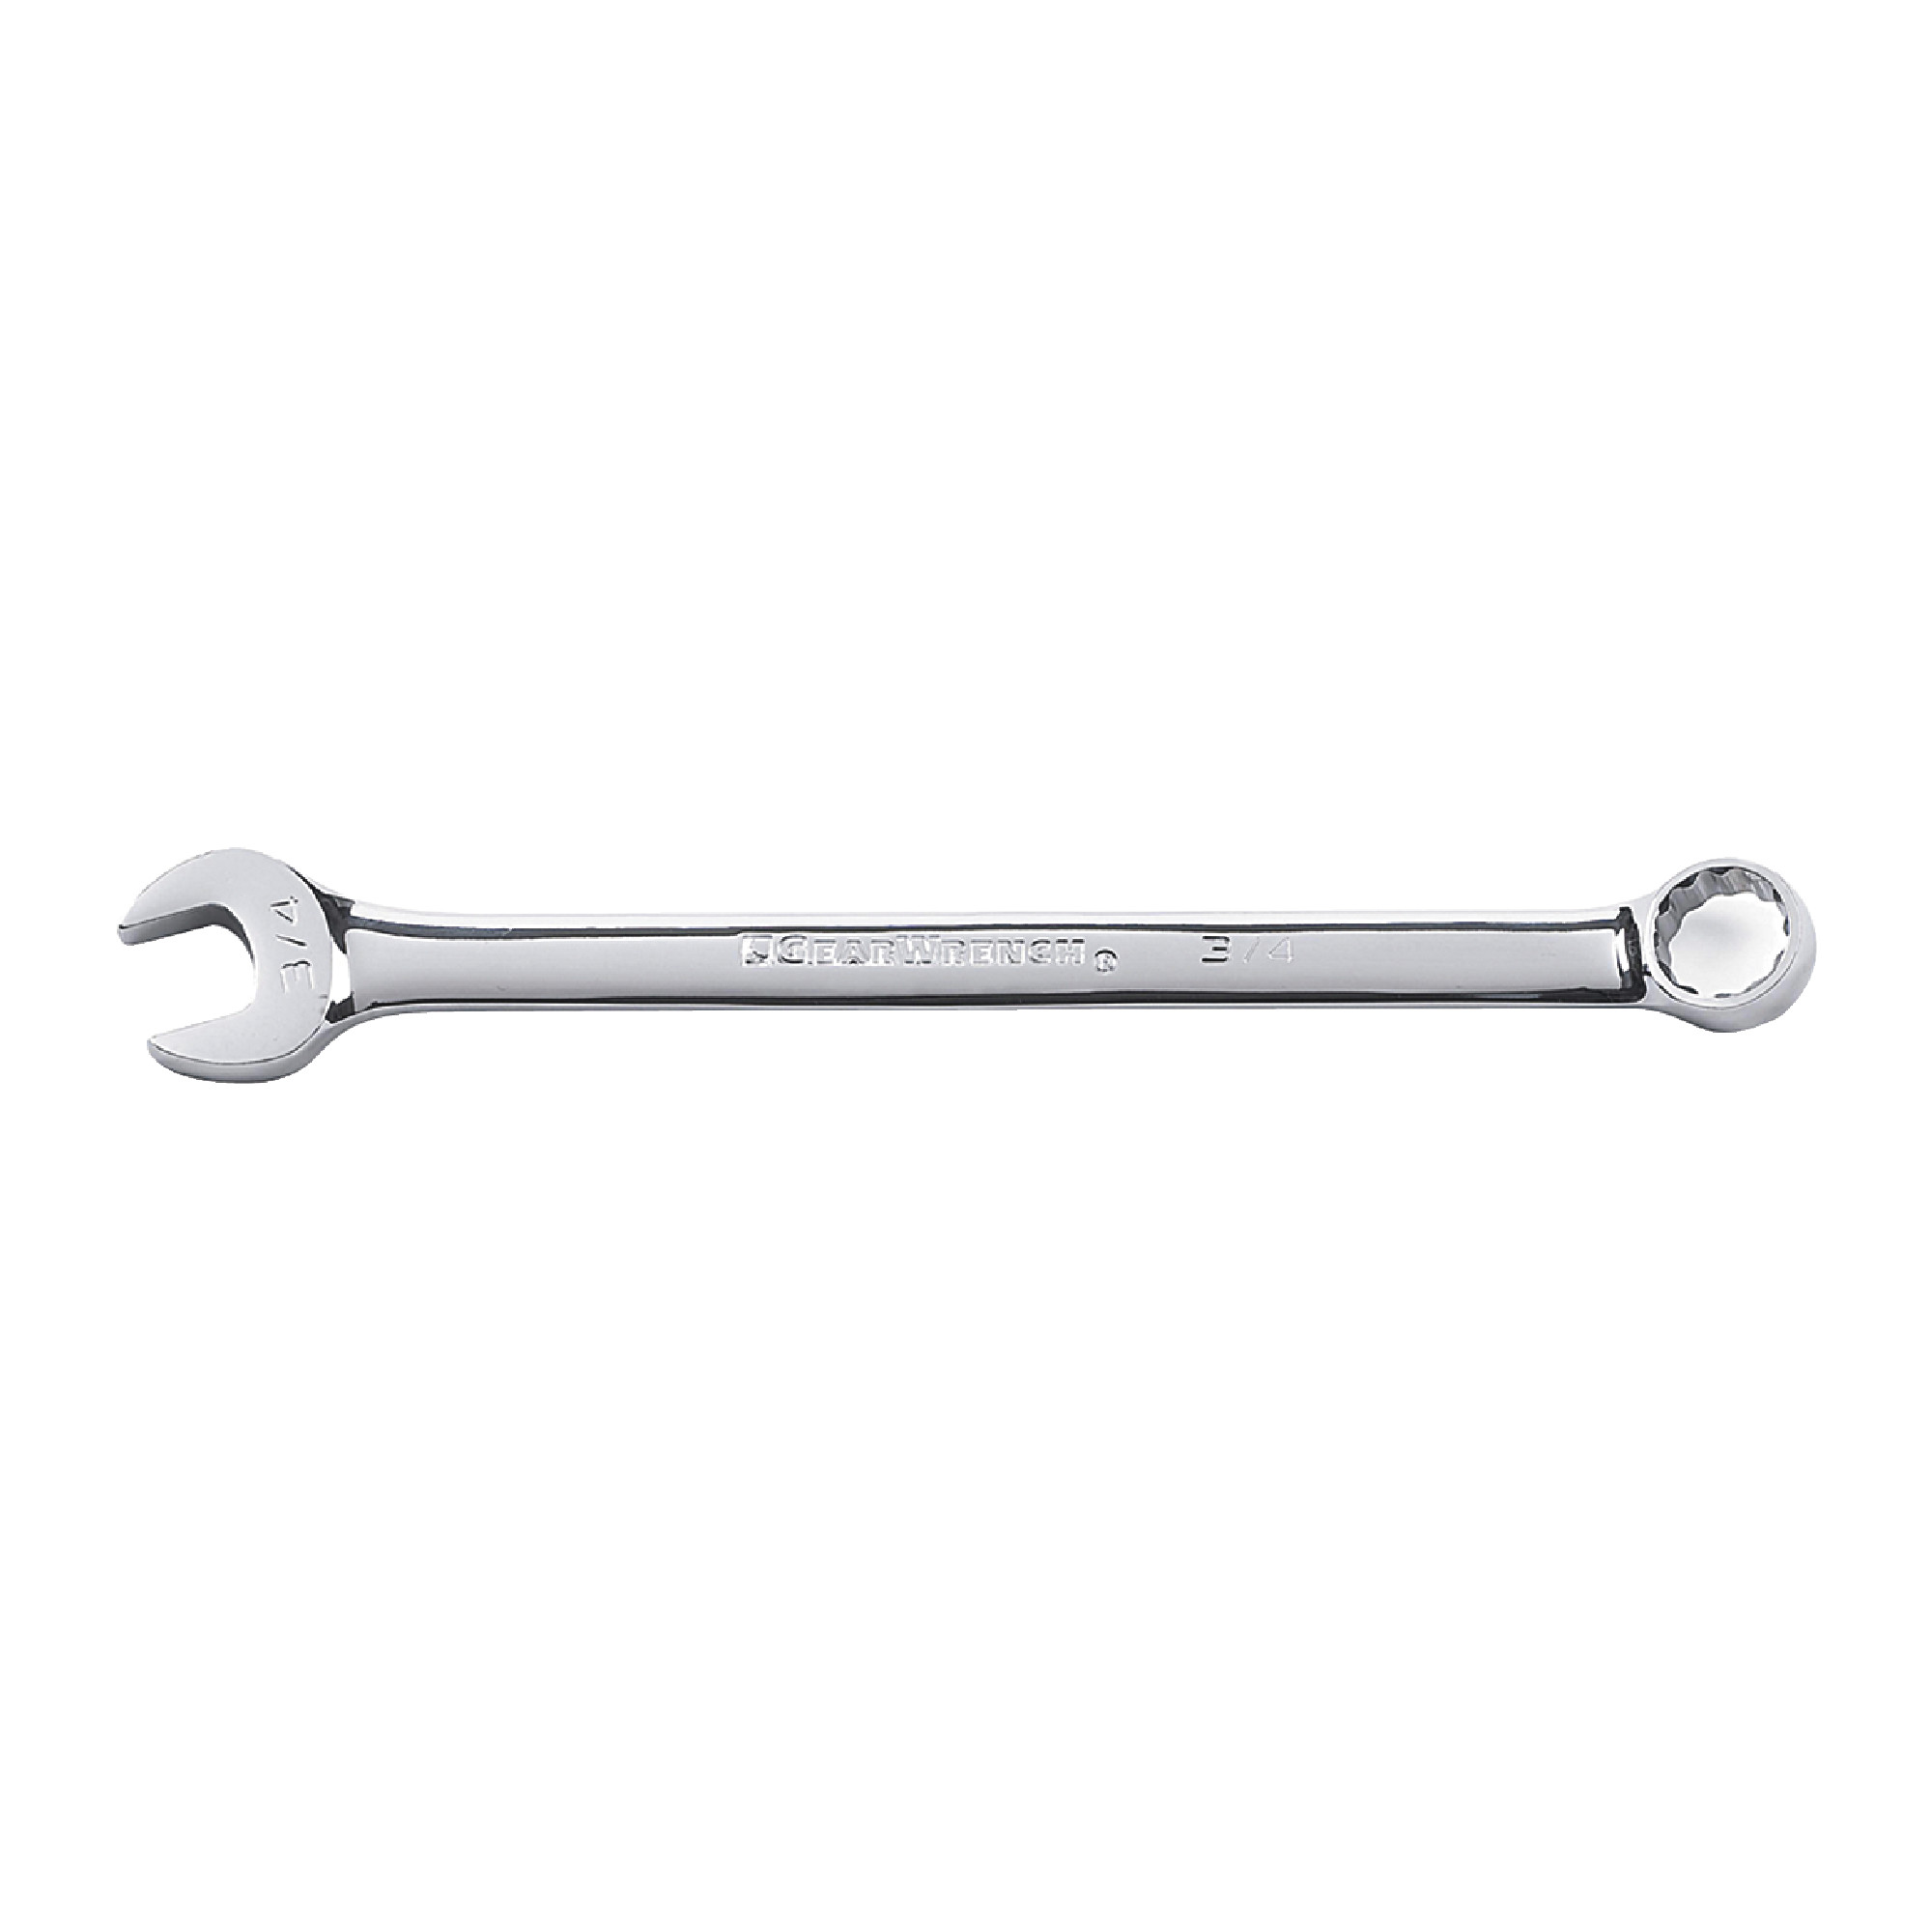 32mm 12 Point Long Pattern Combination Wrench